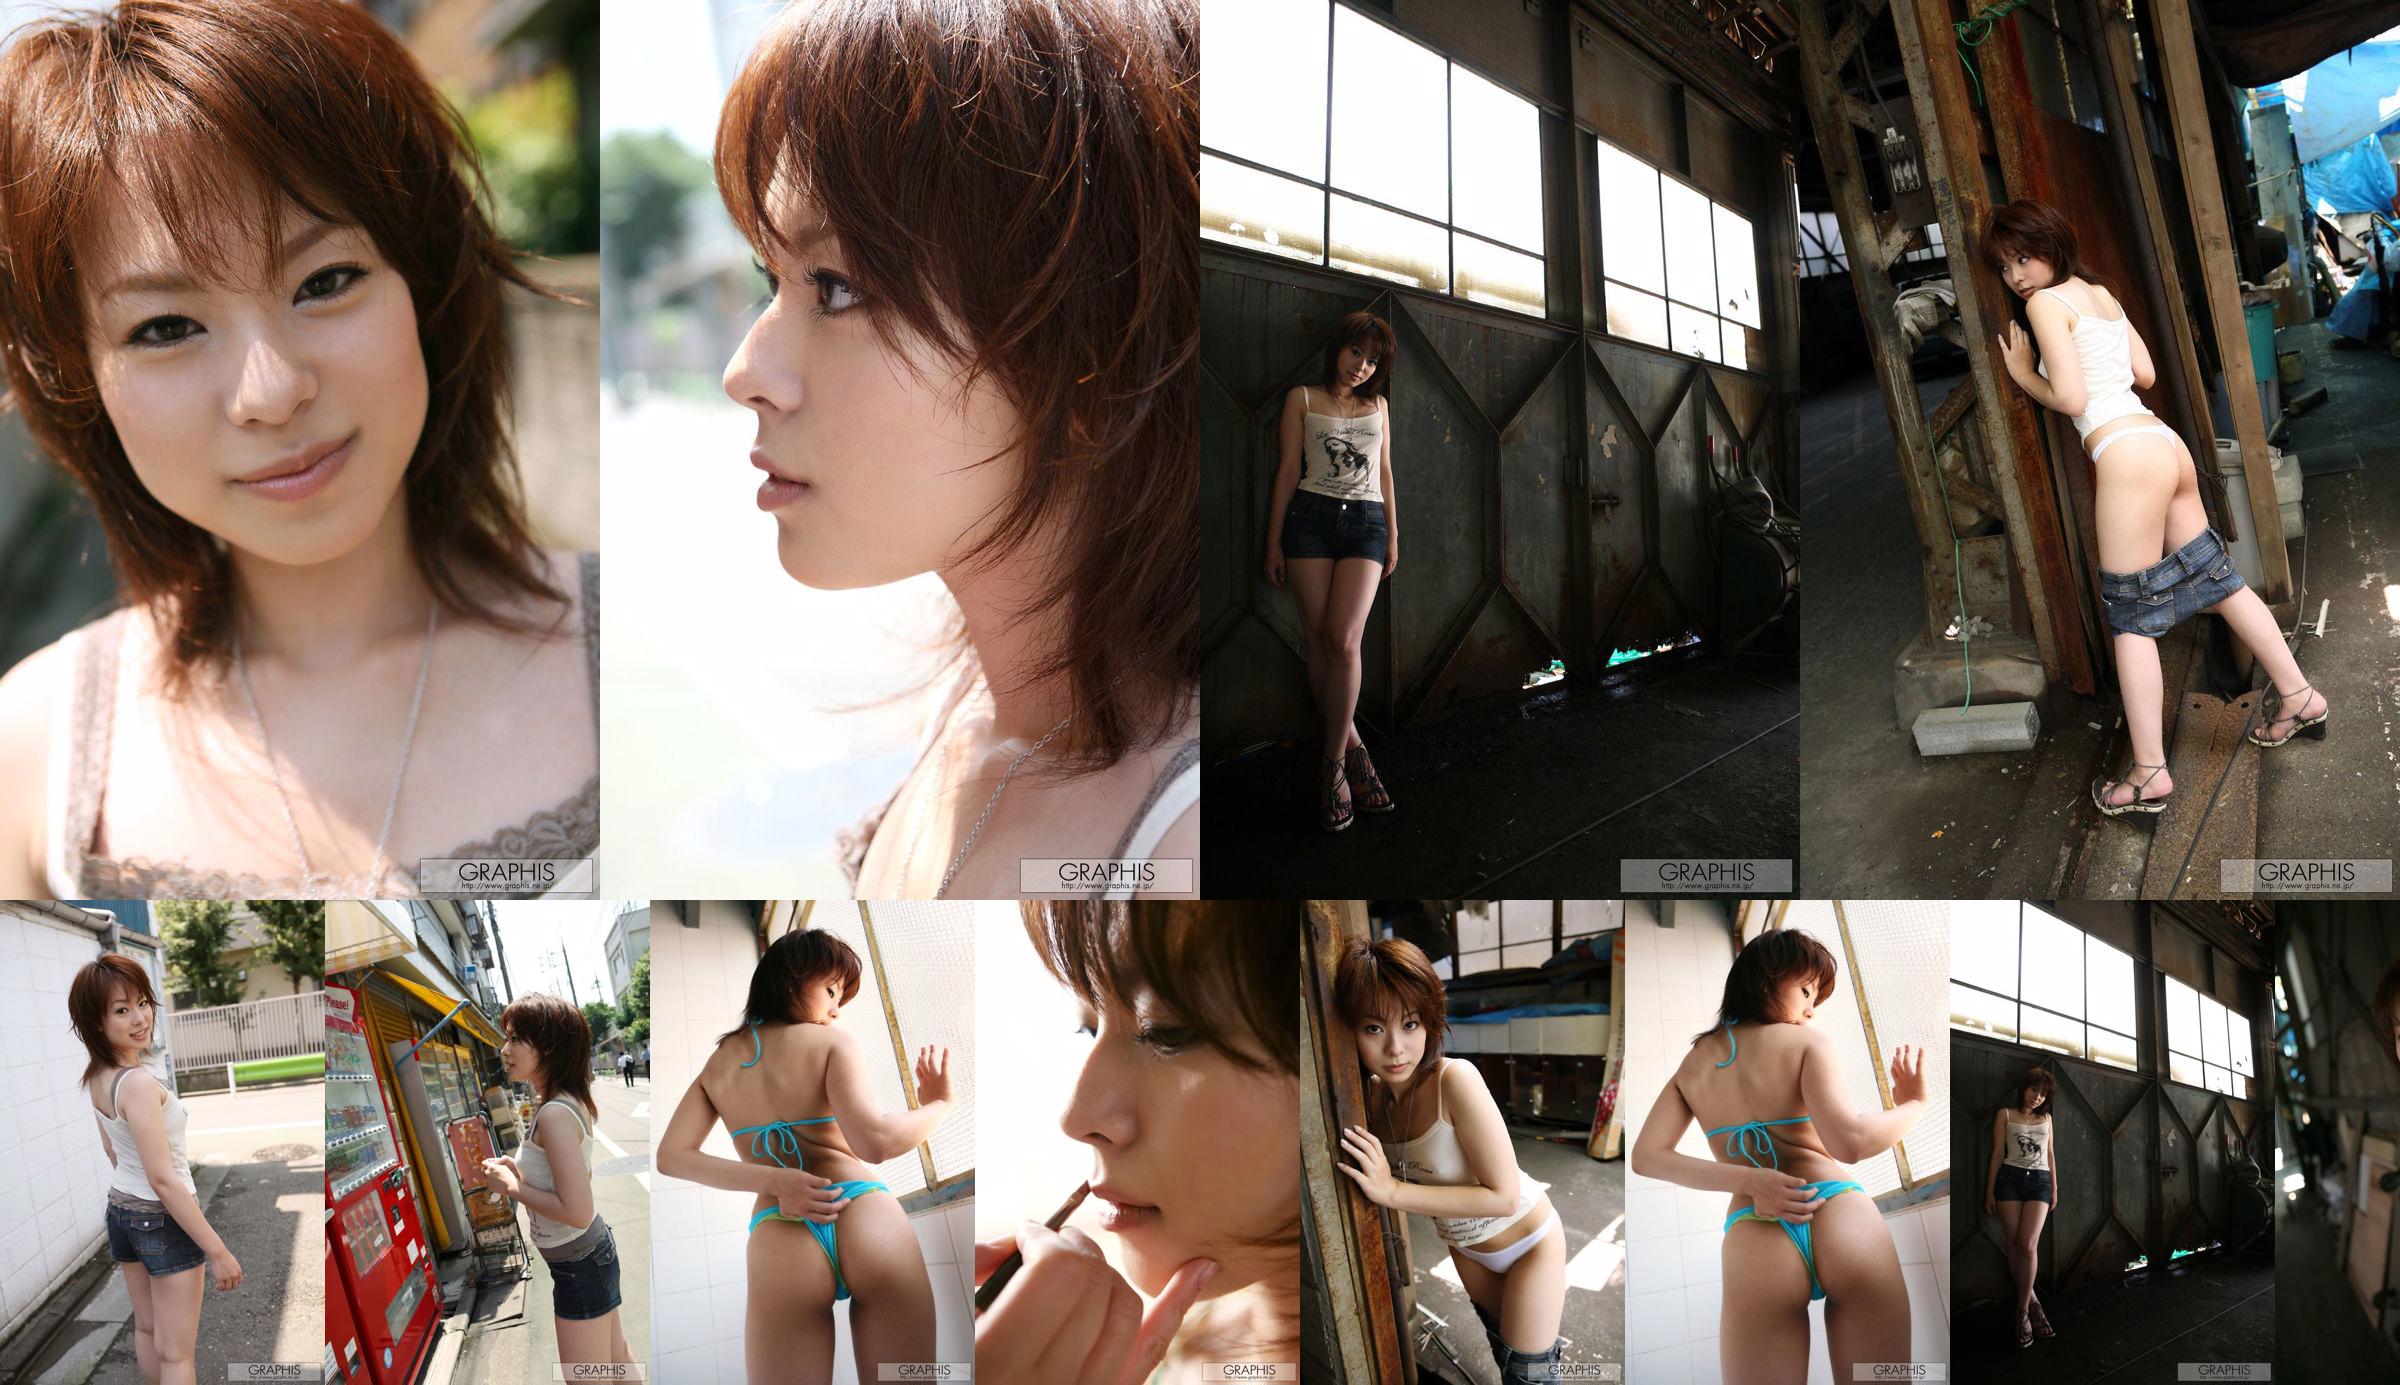 Mina Manabe Mina Manabe [Graphis] First Gravure First Take Off Daughter No.52cd0c Pagina 6